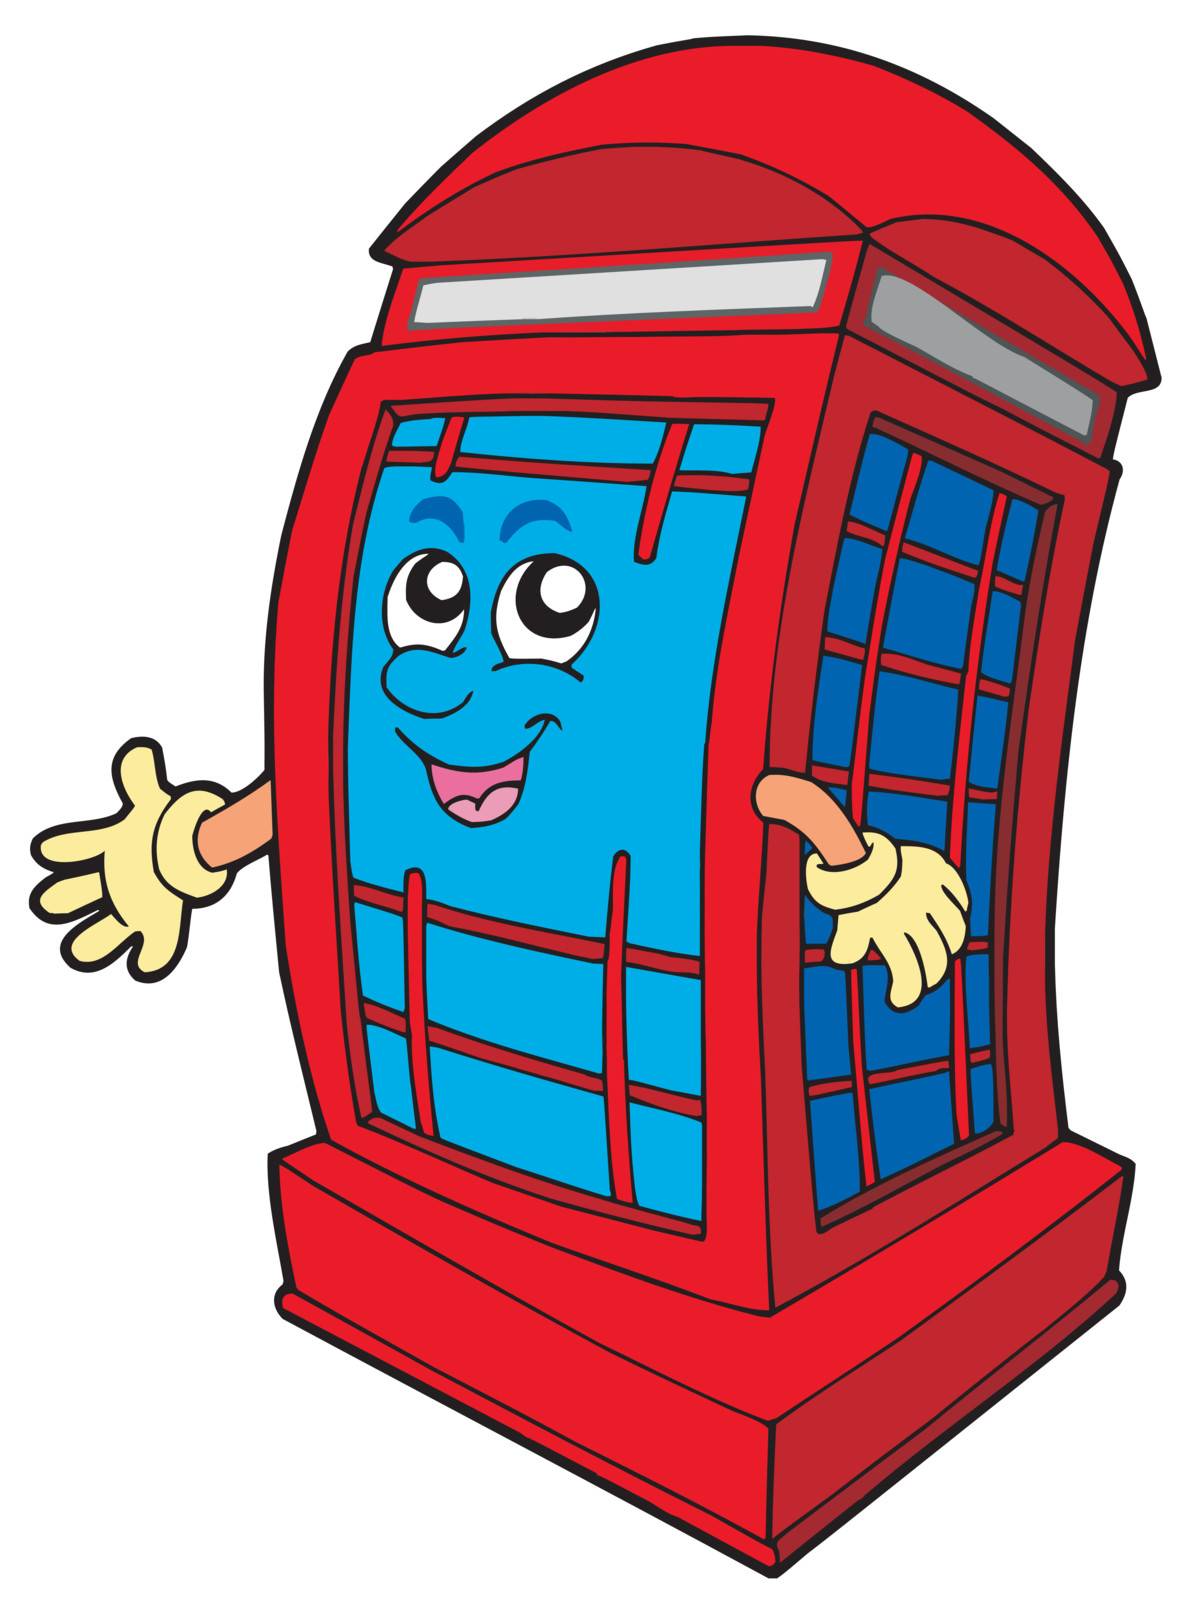 English red phone booth - vector illustration.